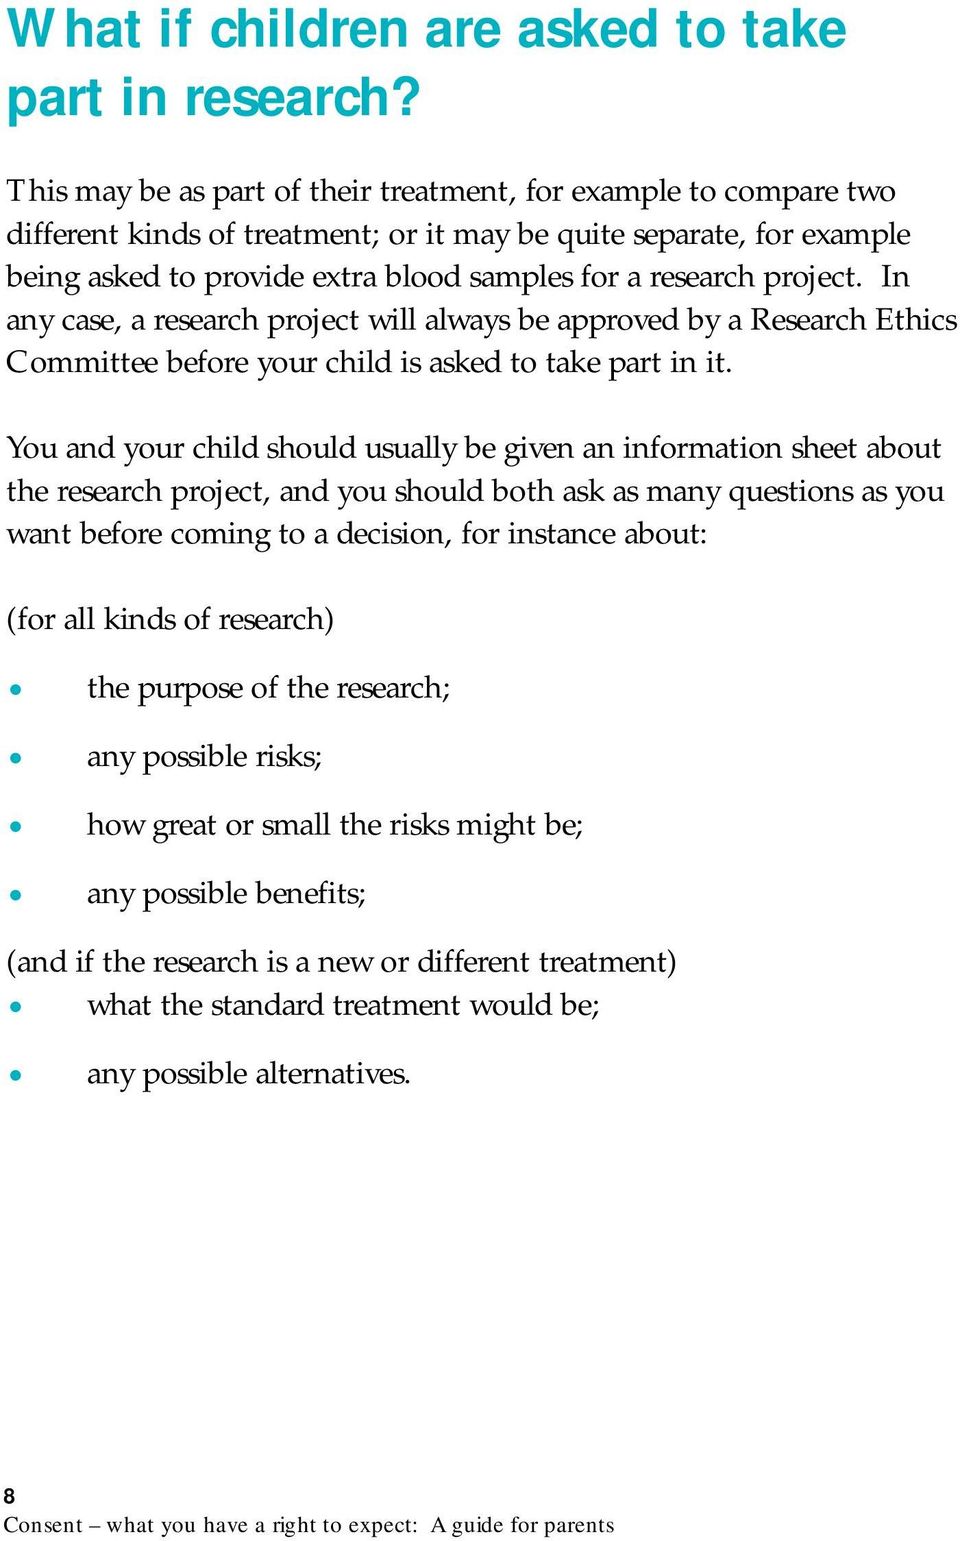 project. In any case, a research project will always be approved by a Research Ethics Committee before your child is asked to take part in it.